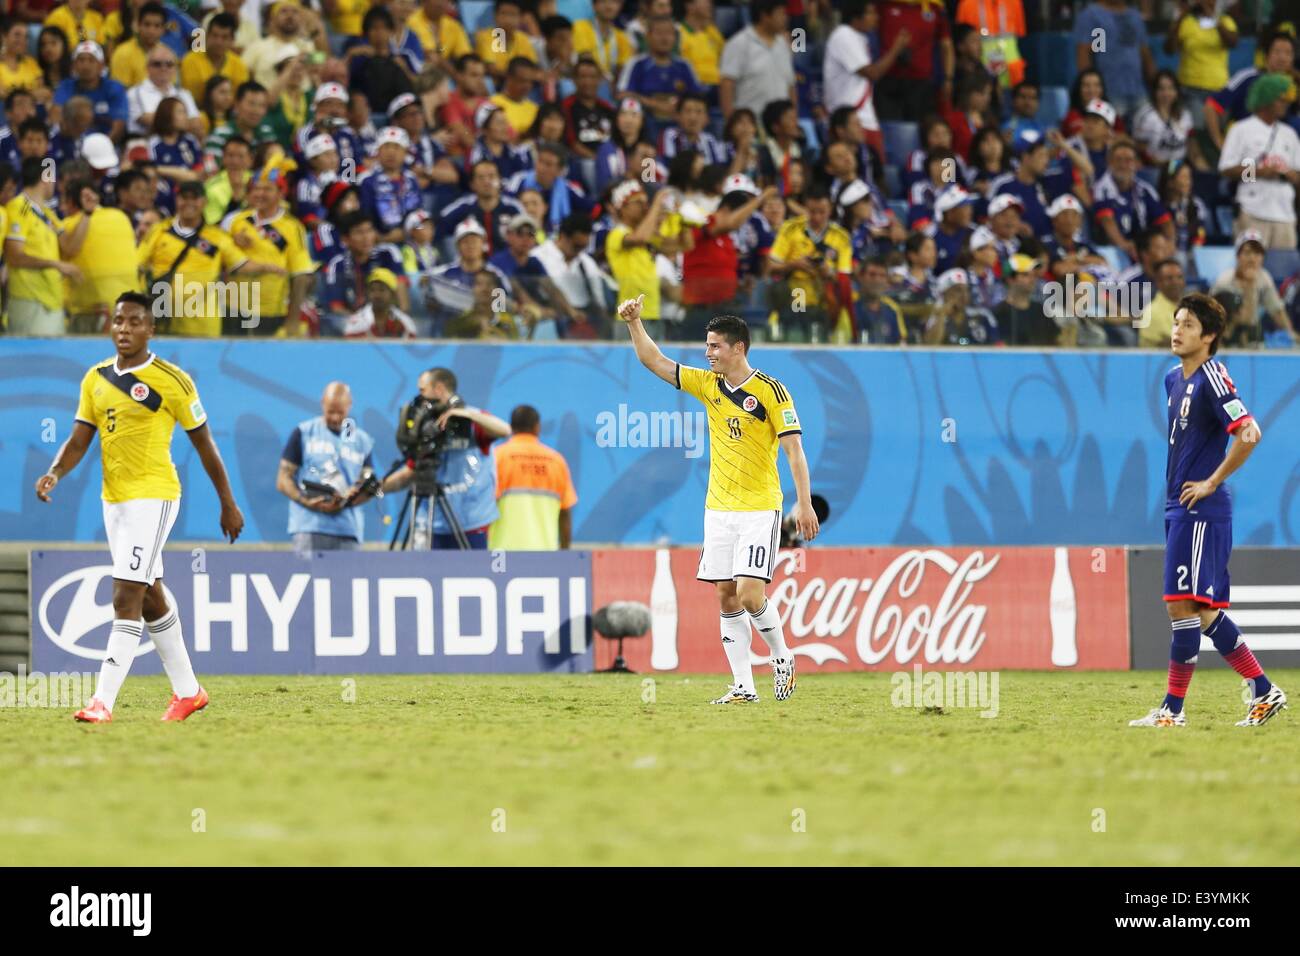 Cuiaba, Brazil. 24th June, 2014. James Rodriguez (COL) Football/Soccer : FIFA World Cup Brazil 2014 Group C match between Japan 1-4 Colombia at the Arena Pantanal in Cuiaba, Brazil . © AFLO/Alamy Live News Stock Photo